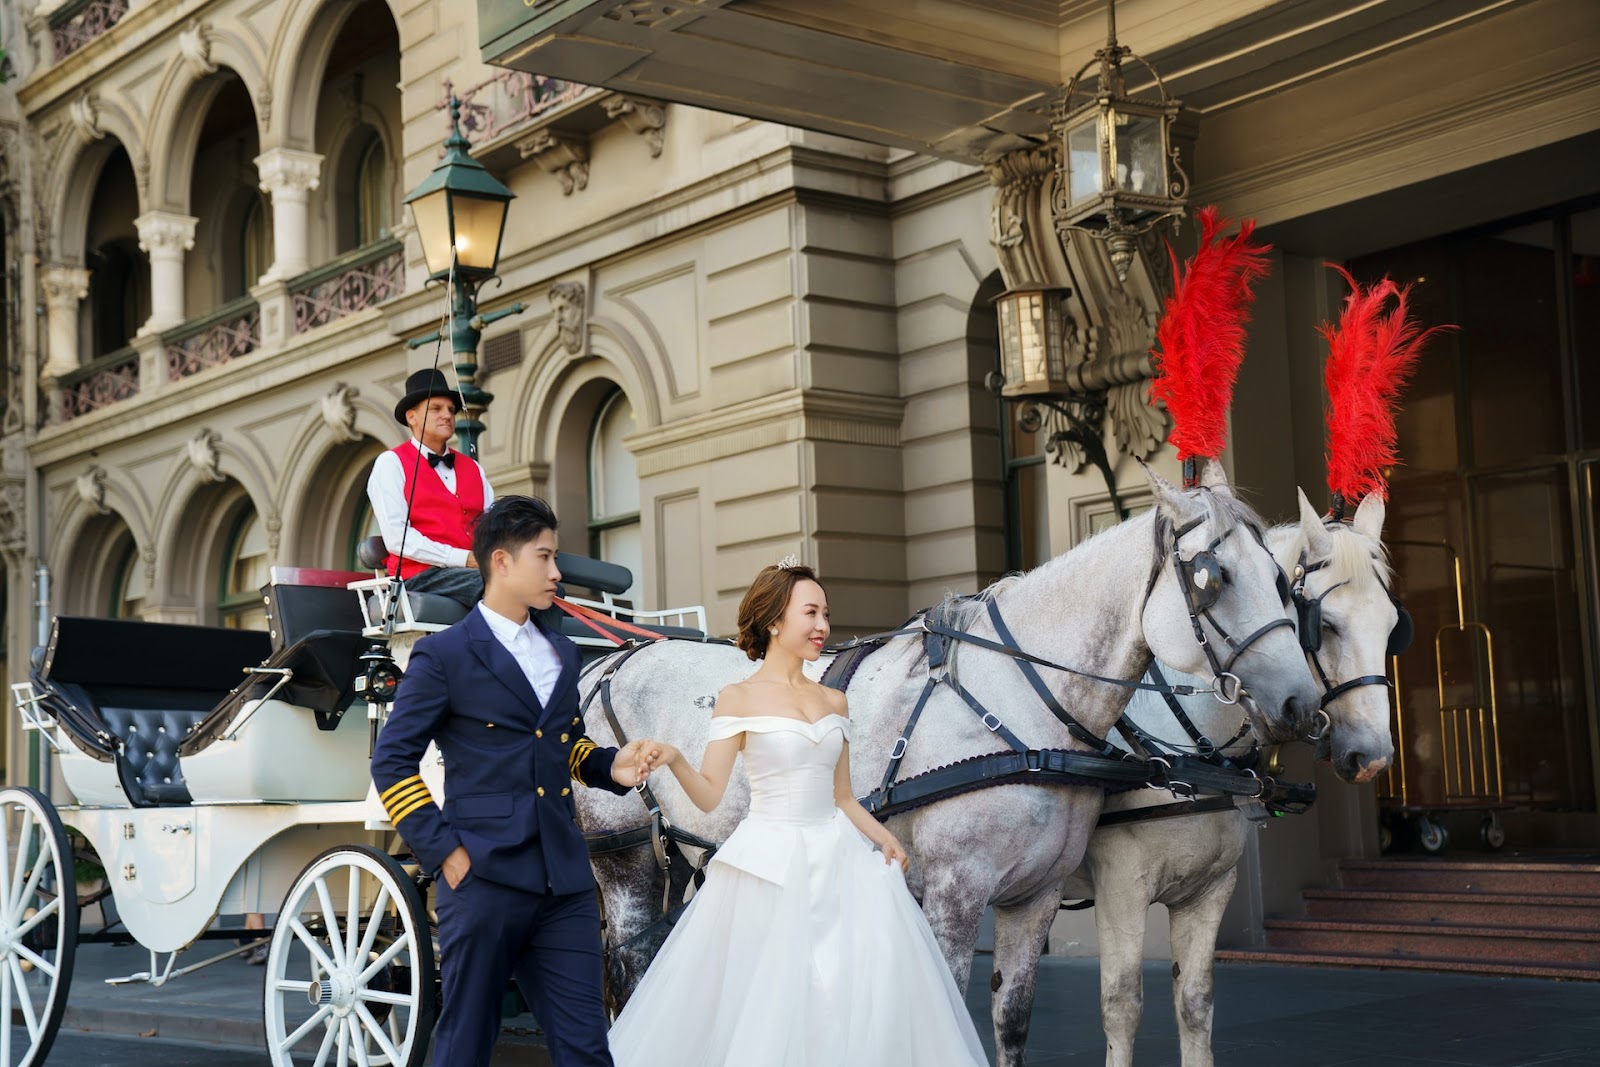 Wedding Transport Ideas - Horse and Carriage - Minstrel Court